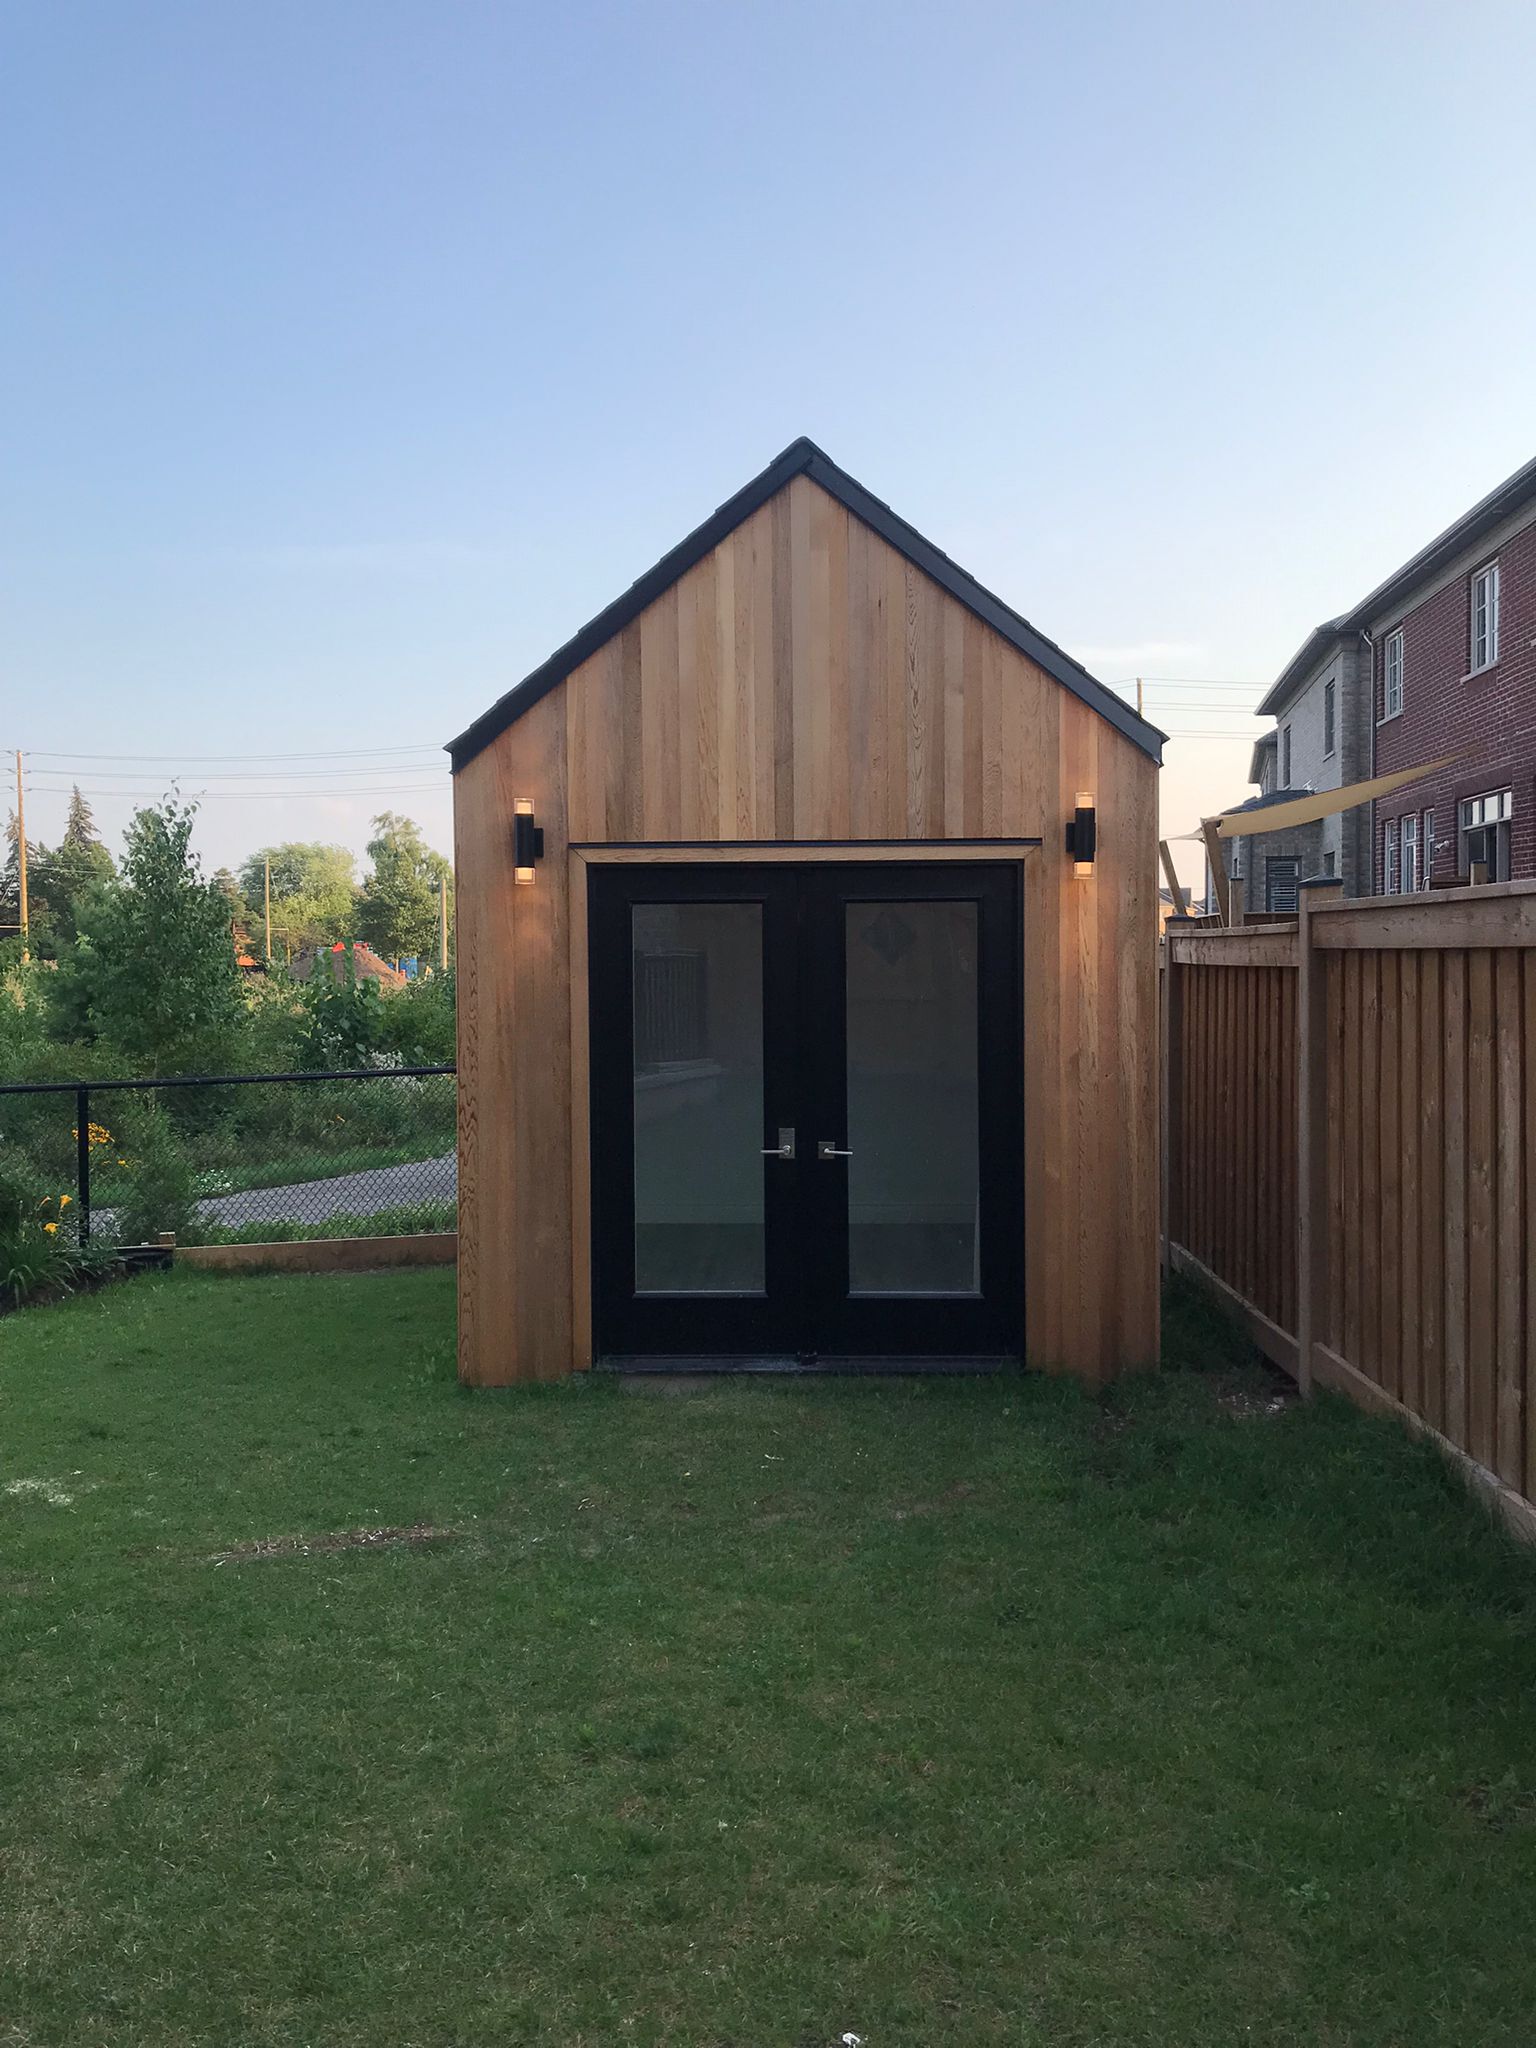 Front view of 9' x 12' Mini Oban Home Studio located in Oakville, Ontario – Summerwood Products